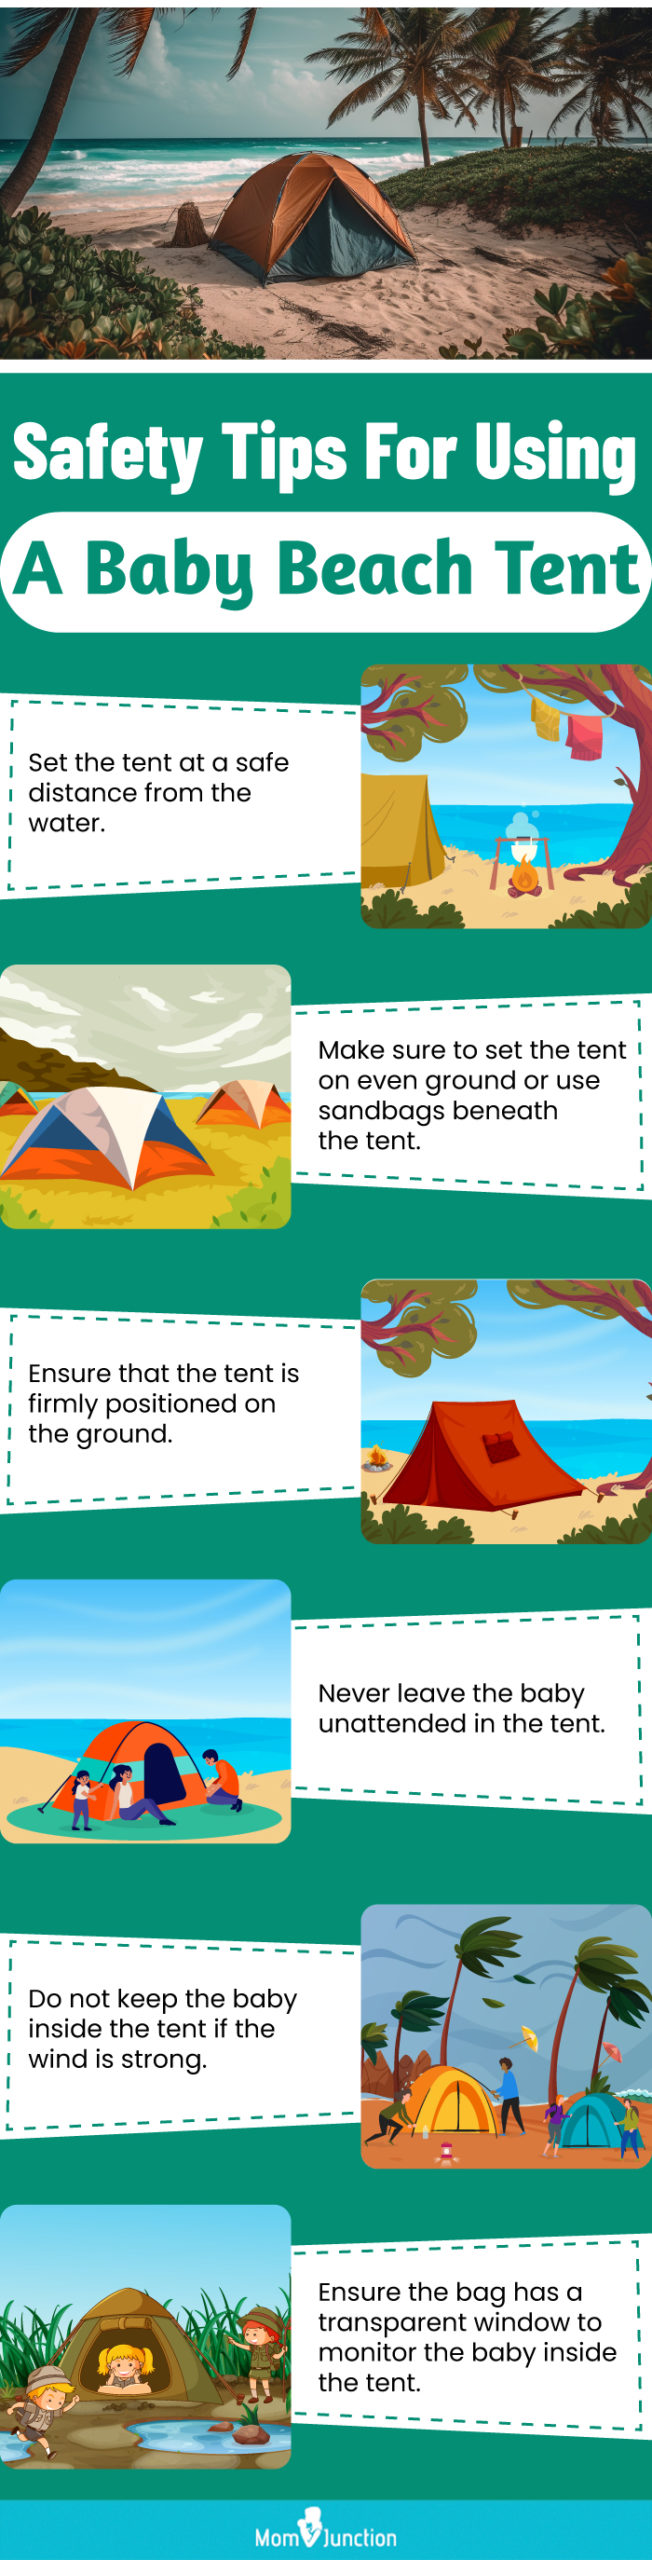 Safety Tips For Using A Baby Beach Tent (infographic)